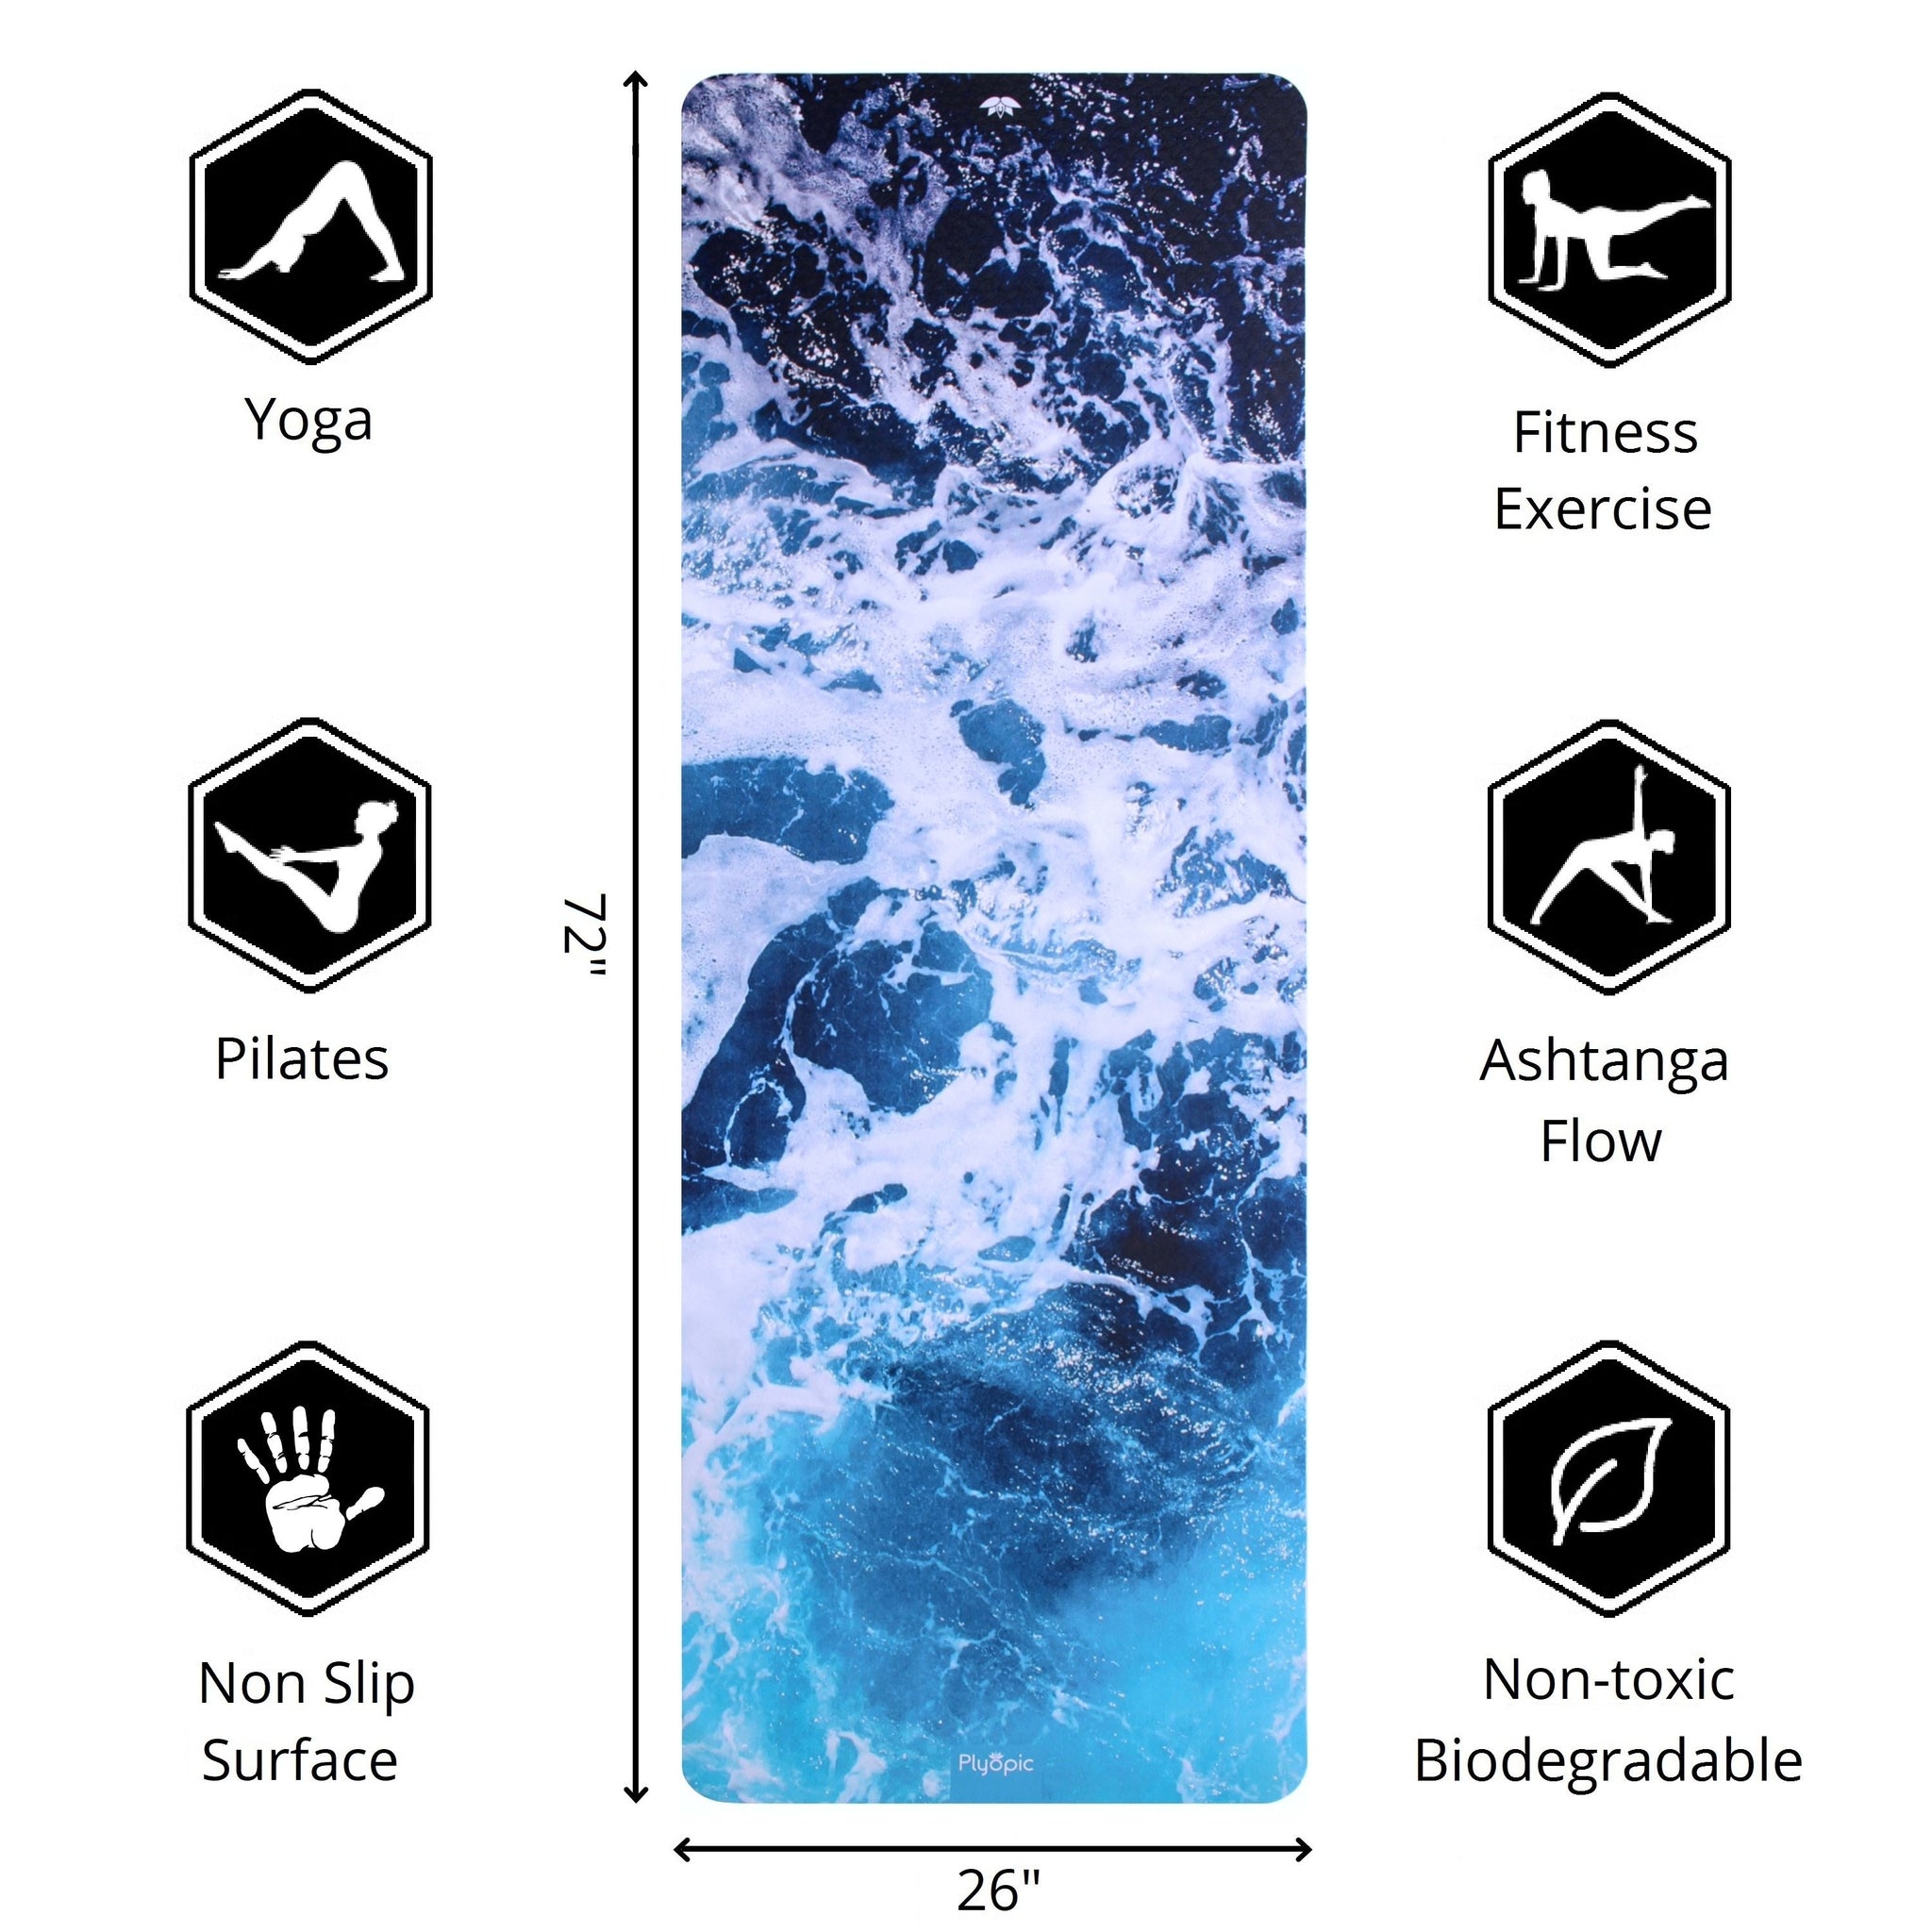 Plyopic-Printed Yoga, Pilates & Exercise Mat - Pacific 72inch x 26inch Yoga Mat